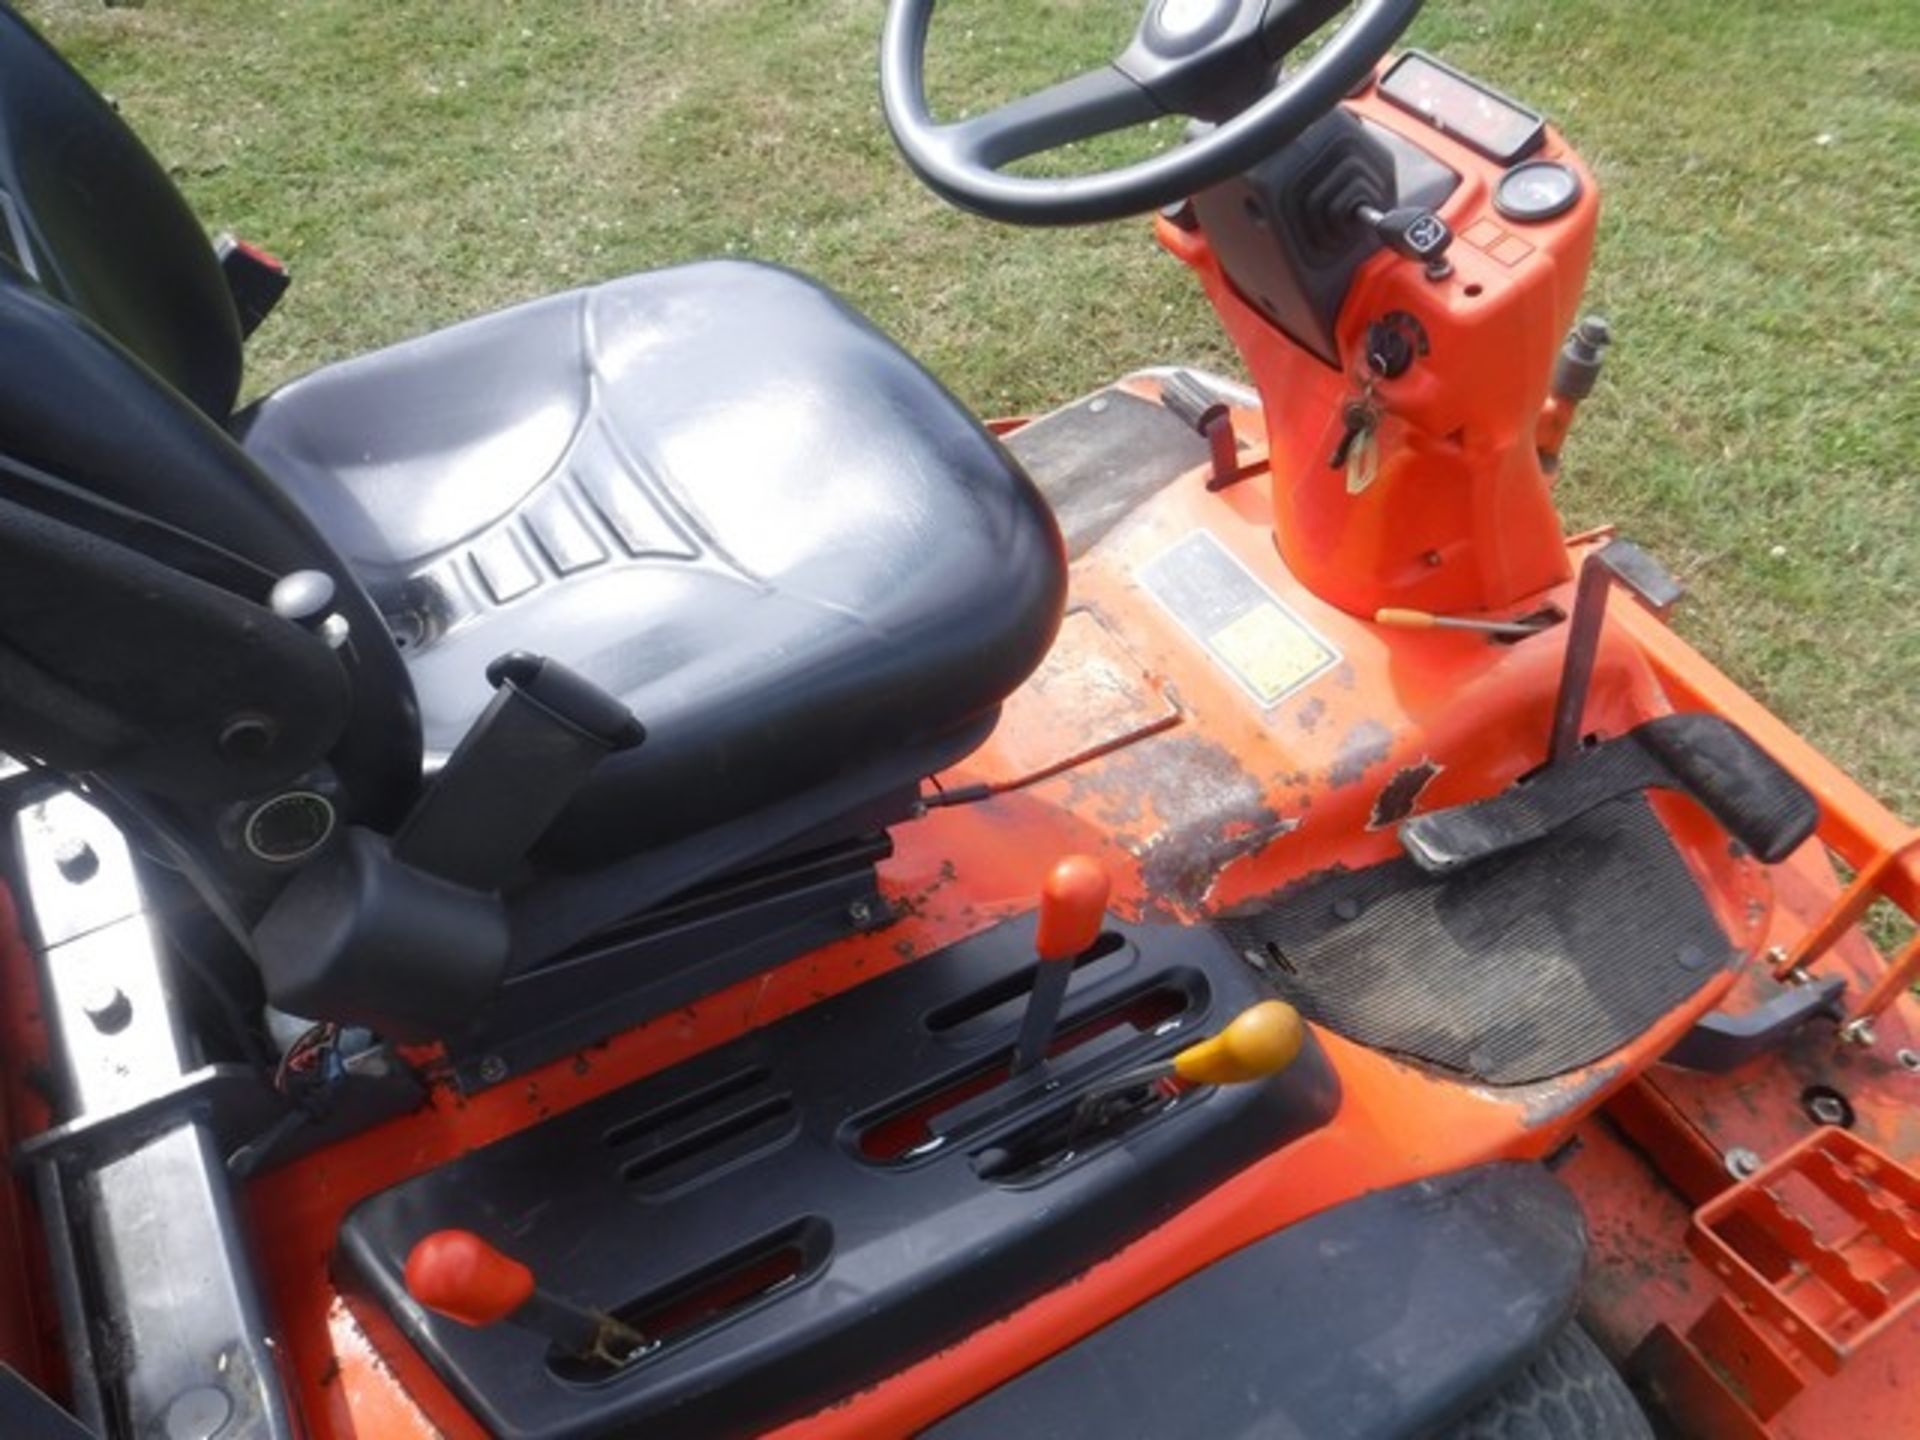 2007 KUBOTA F2880 ride on mower. S/N F2880EC c/w out front cutting deck. 3496 hrs (not verified) - Image 4 of 13